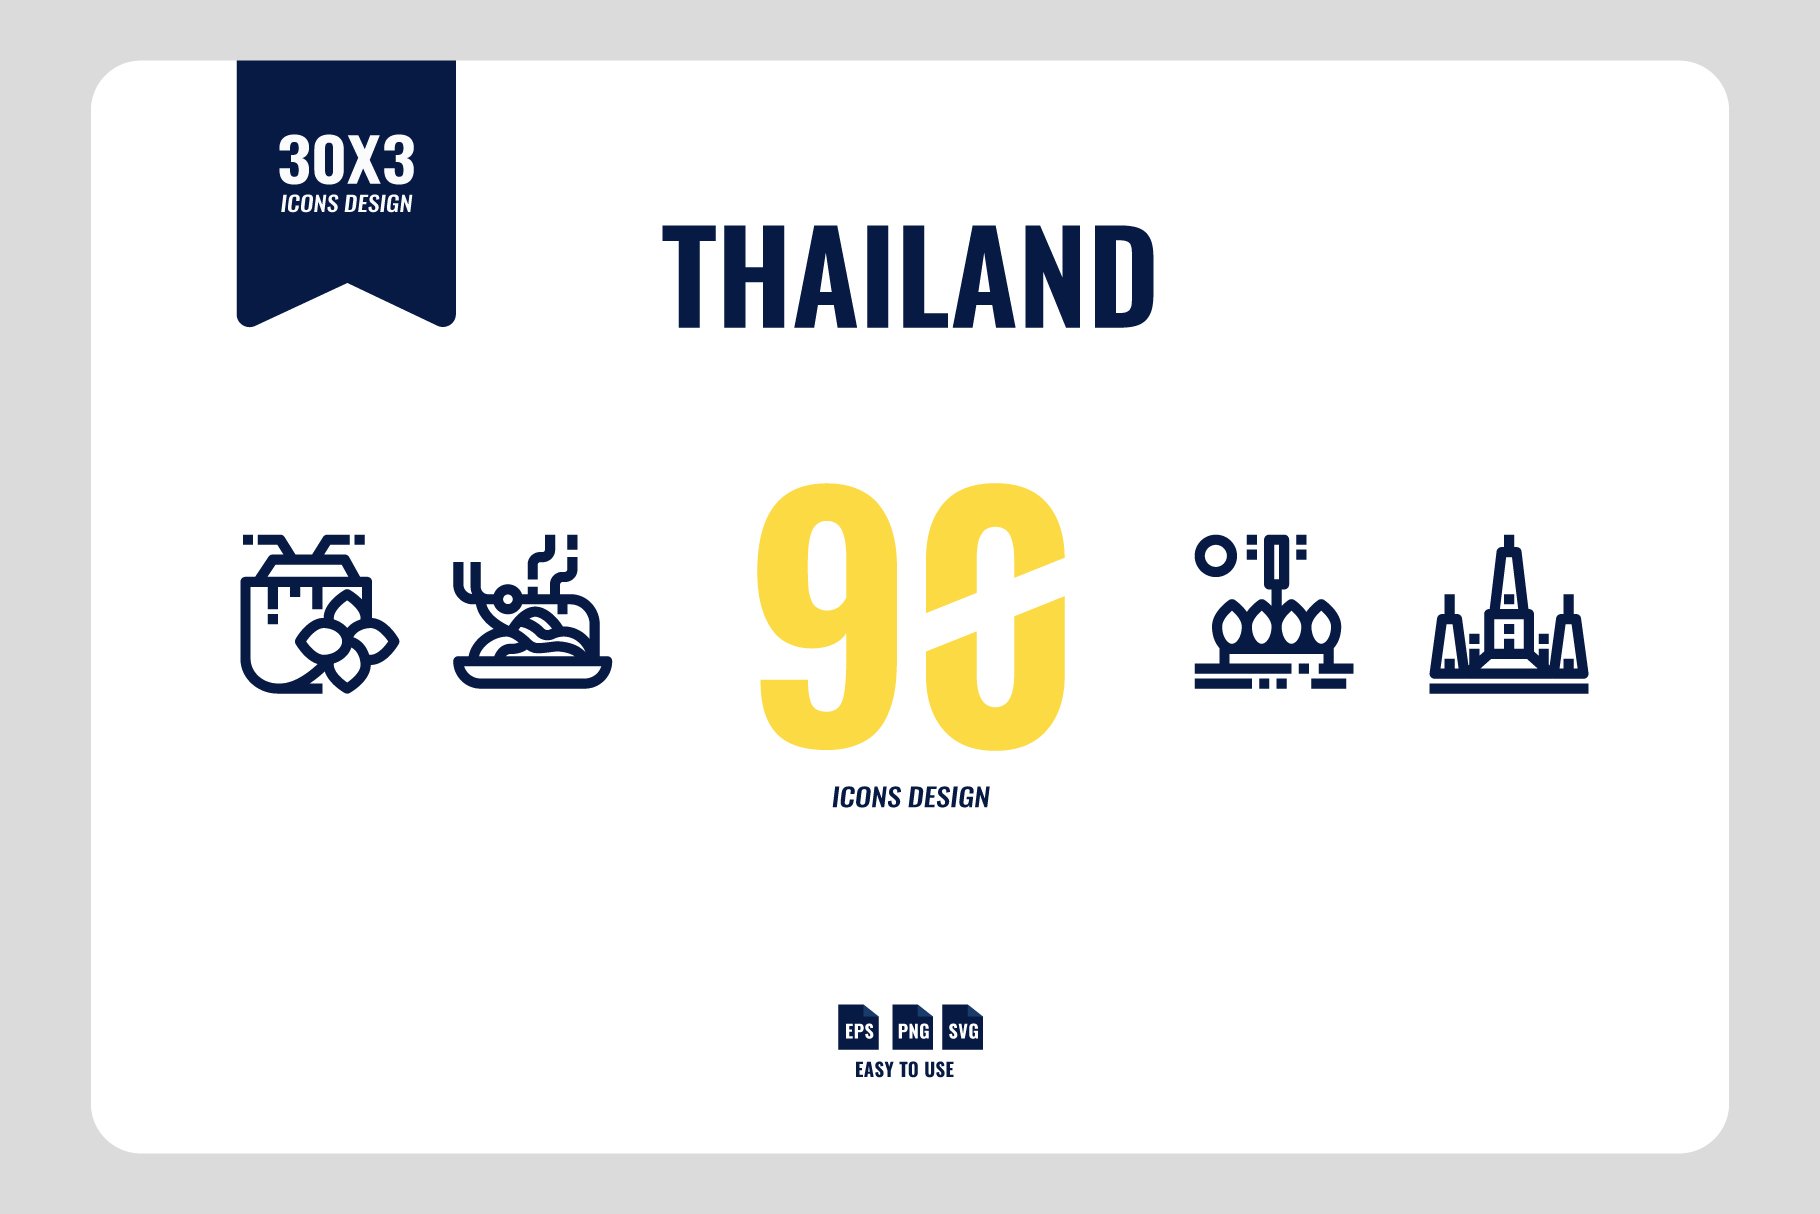 Thailand 90 Icons cover image.